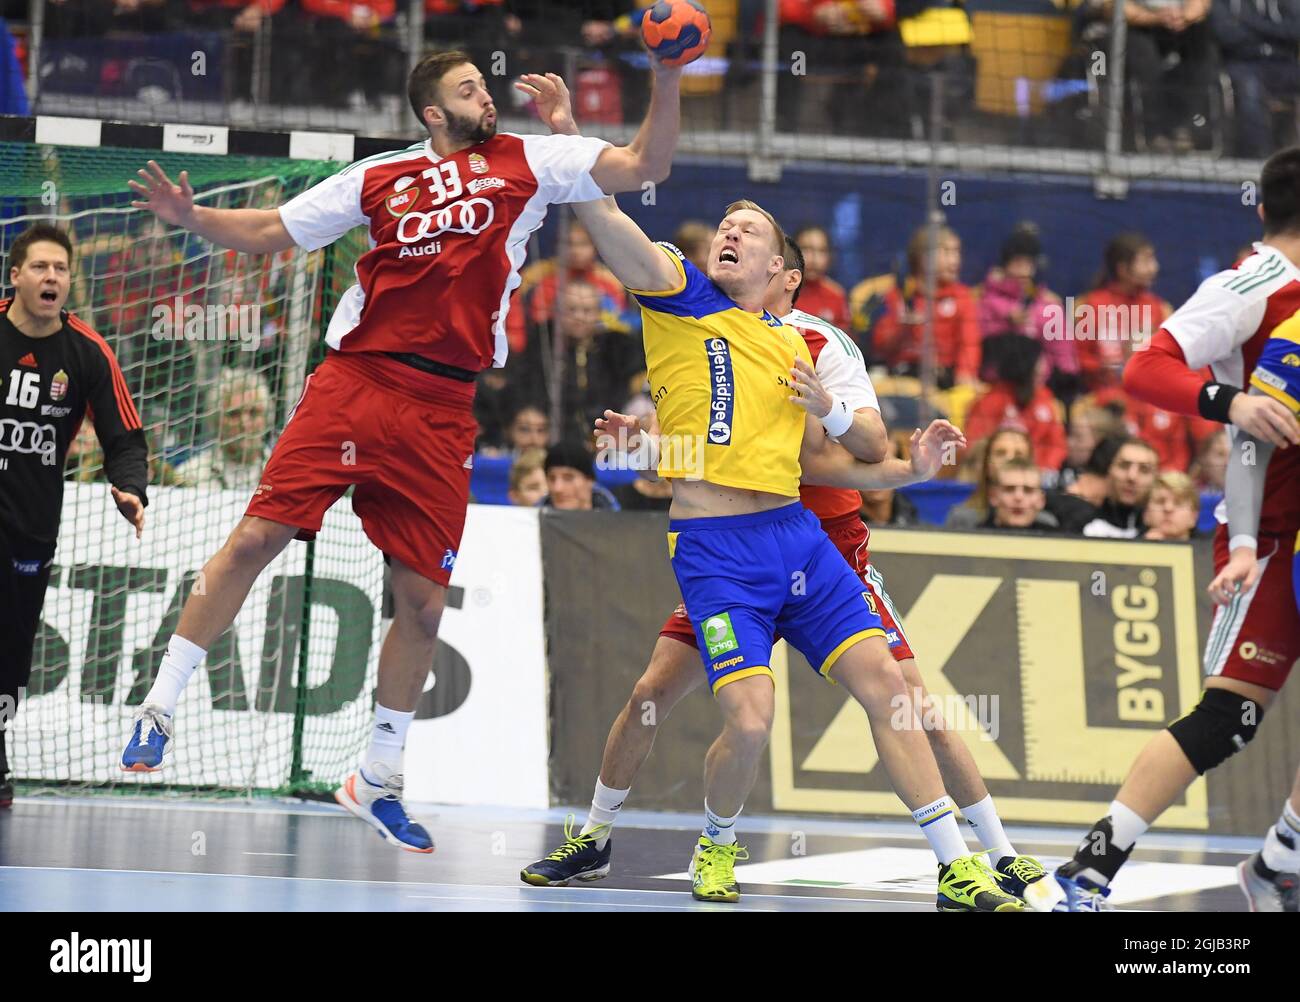 Hungary's Gabor Ancsin and Sweden's Fredric during a friendly hanball game between Sweden and Hungary at Arena, Jonkoping, Sweden Jan 06, 2018 Photo: Mikael Fritzon / TT / kod 62360 Photo - Alamy